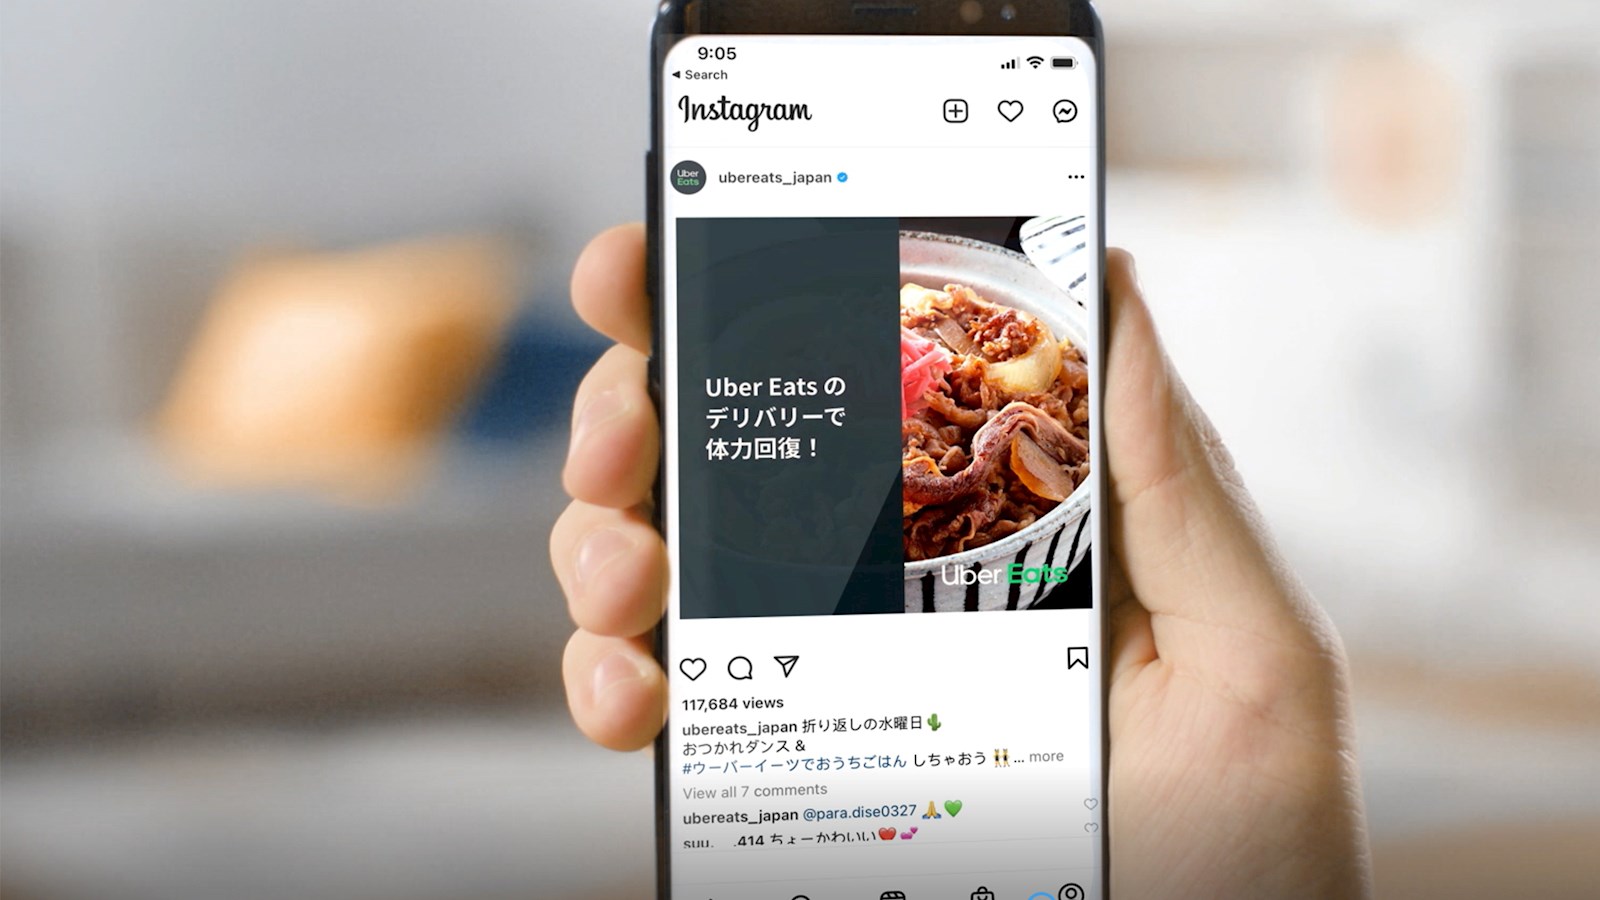 UberEats Japan on a mobile phone screen